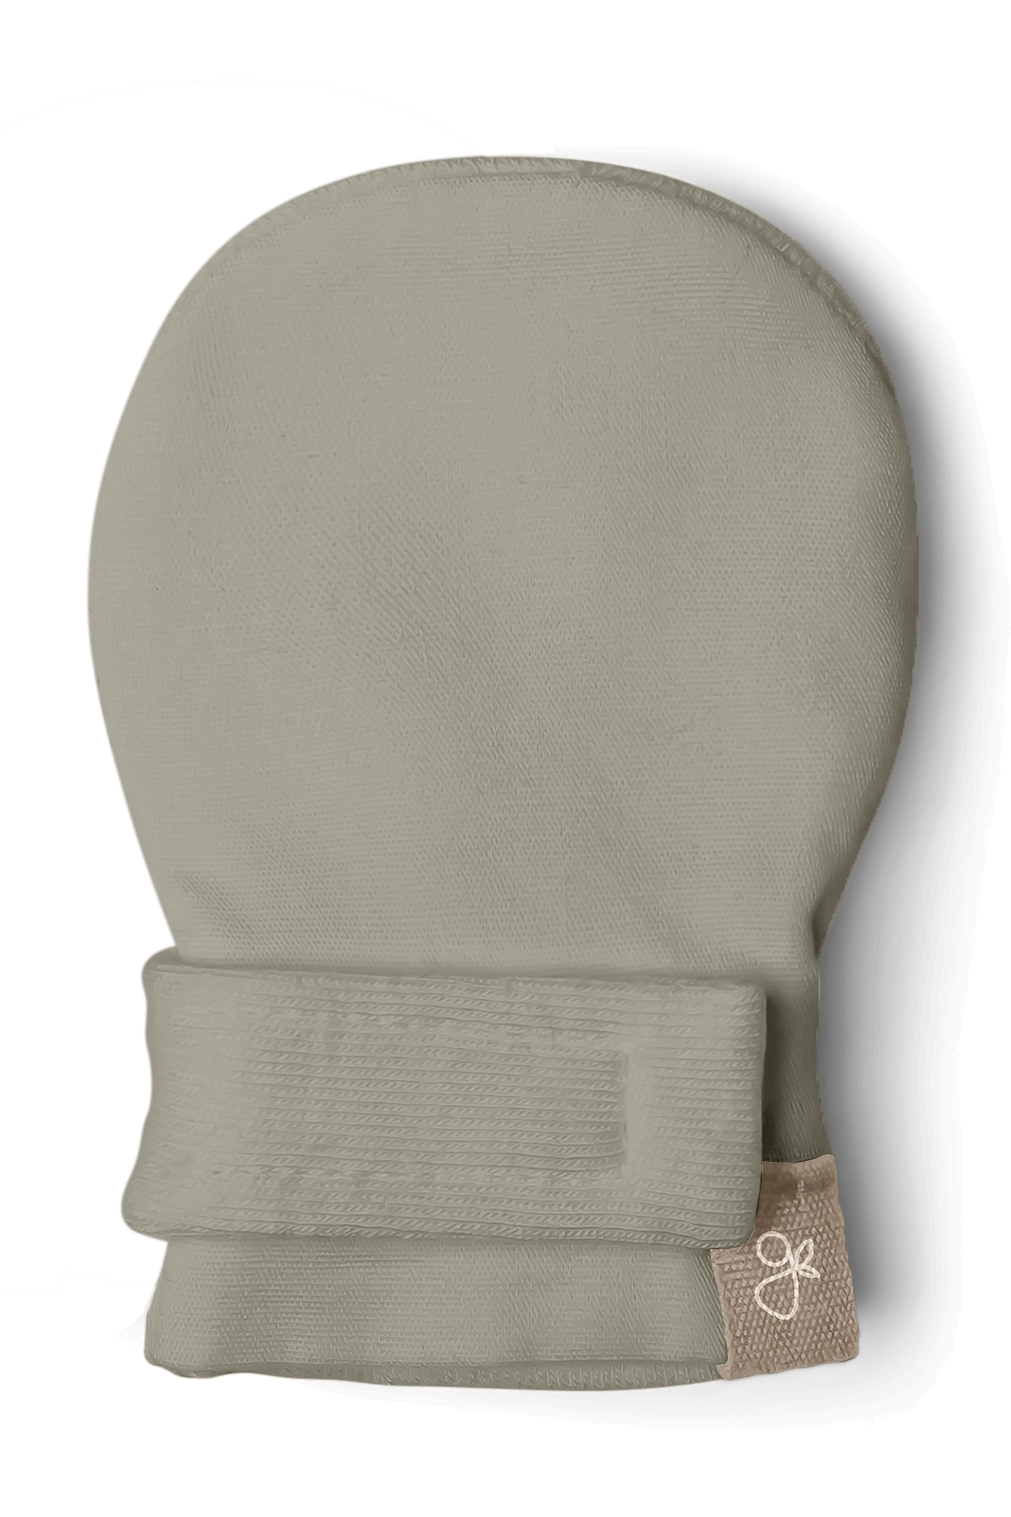 Goumi_Preemie_Mitts_Moss_Front_Tan_Label.png